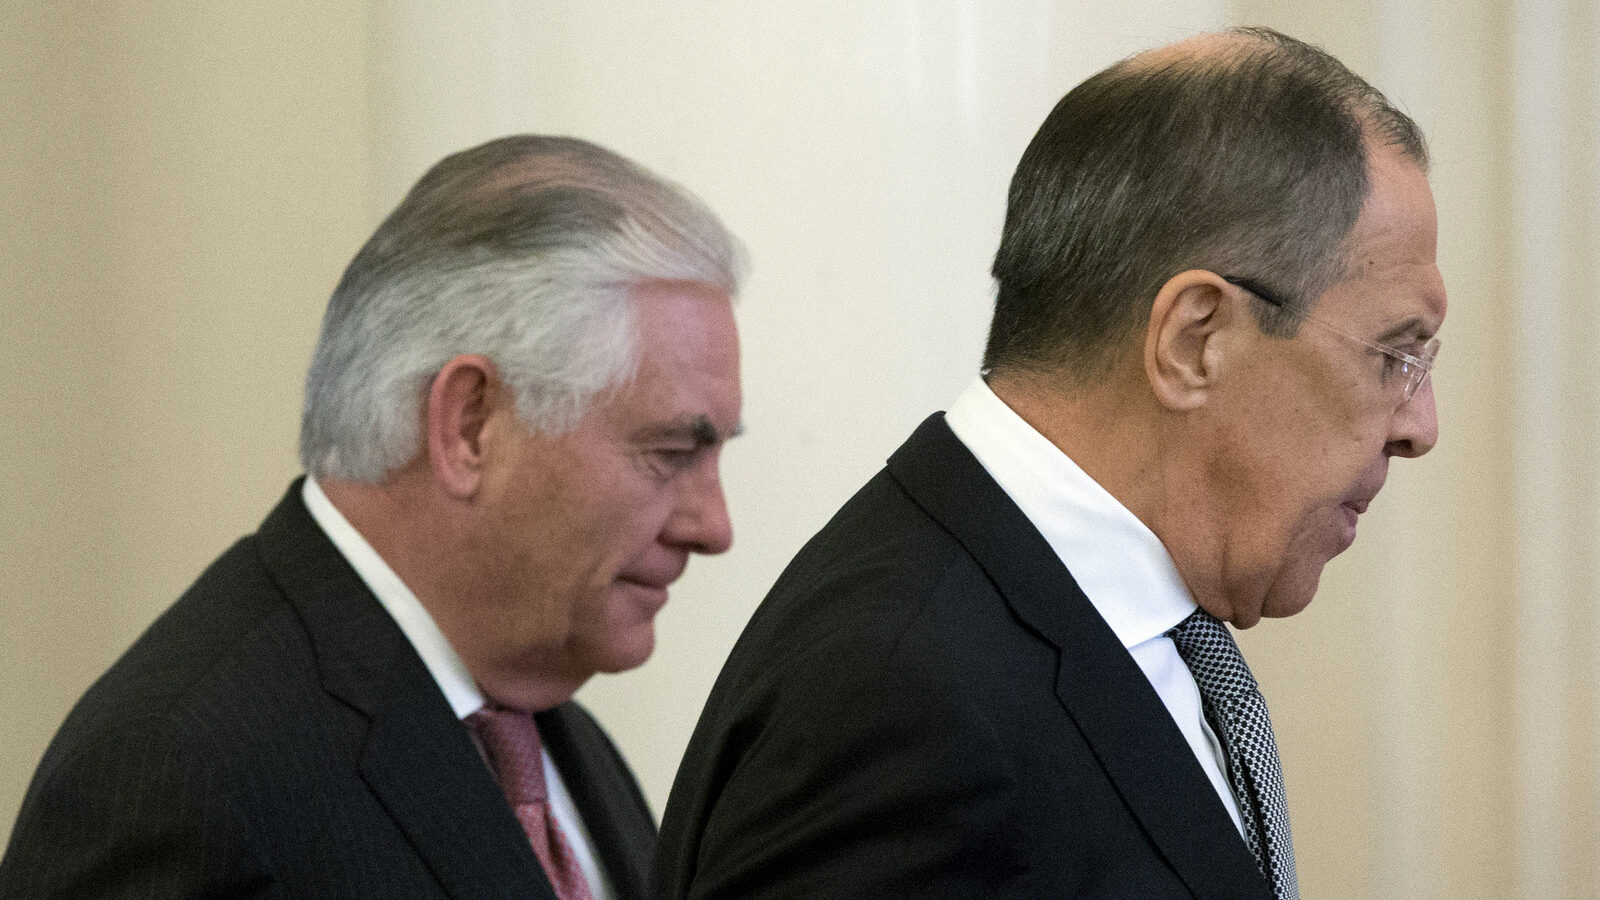 US Secretary of State Rex Tillerson, left, and Russian Foreign Minister Sergey Lavrov walk prior to their talks in Moscow, Russia, Wednesday, April 12, 2017. Tillerson's Moscow talks hinge on new US leverage over Syria. (AP/Alexander Zemlianichenko)